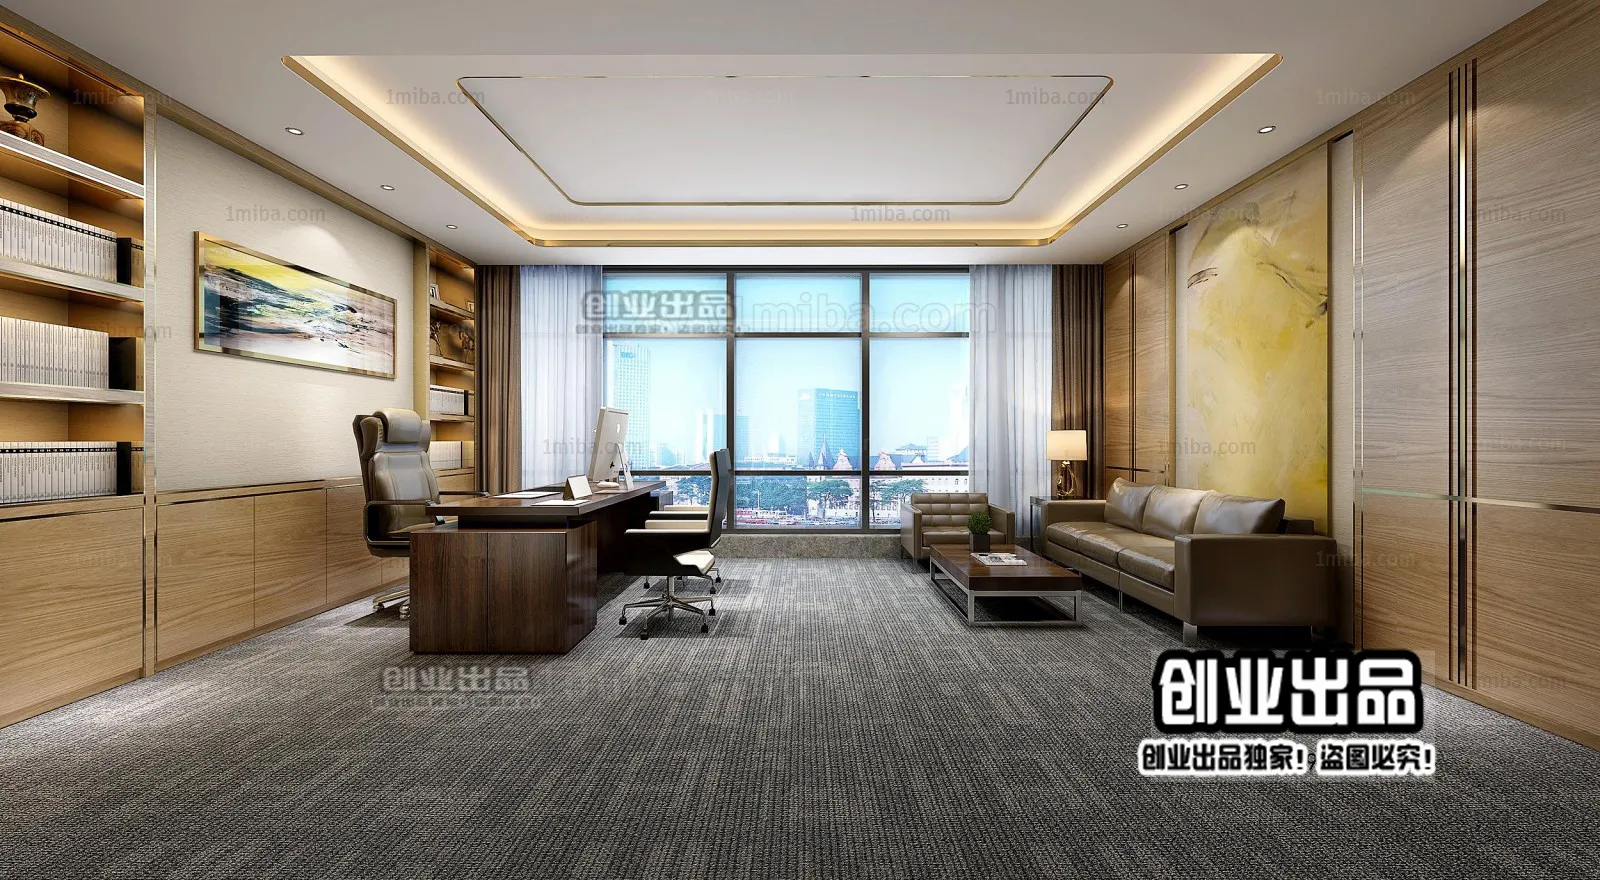 3D OFFICE INTERIOR (VRAY) – MANAGER ROOM 3D SCENES – 023